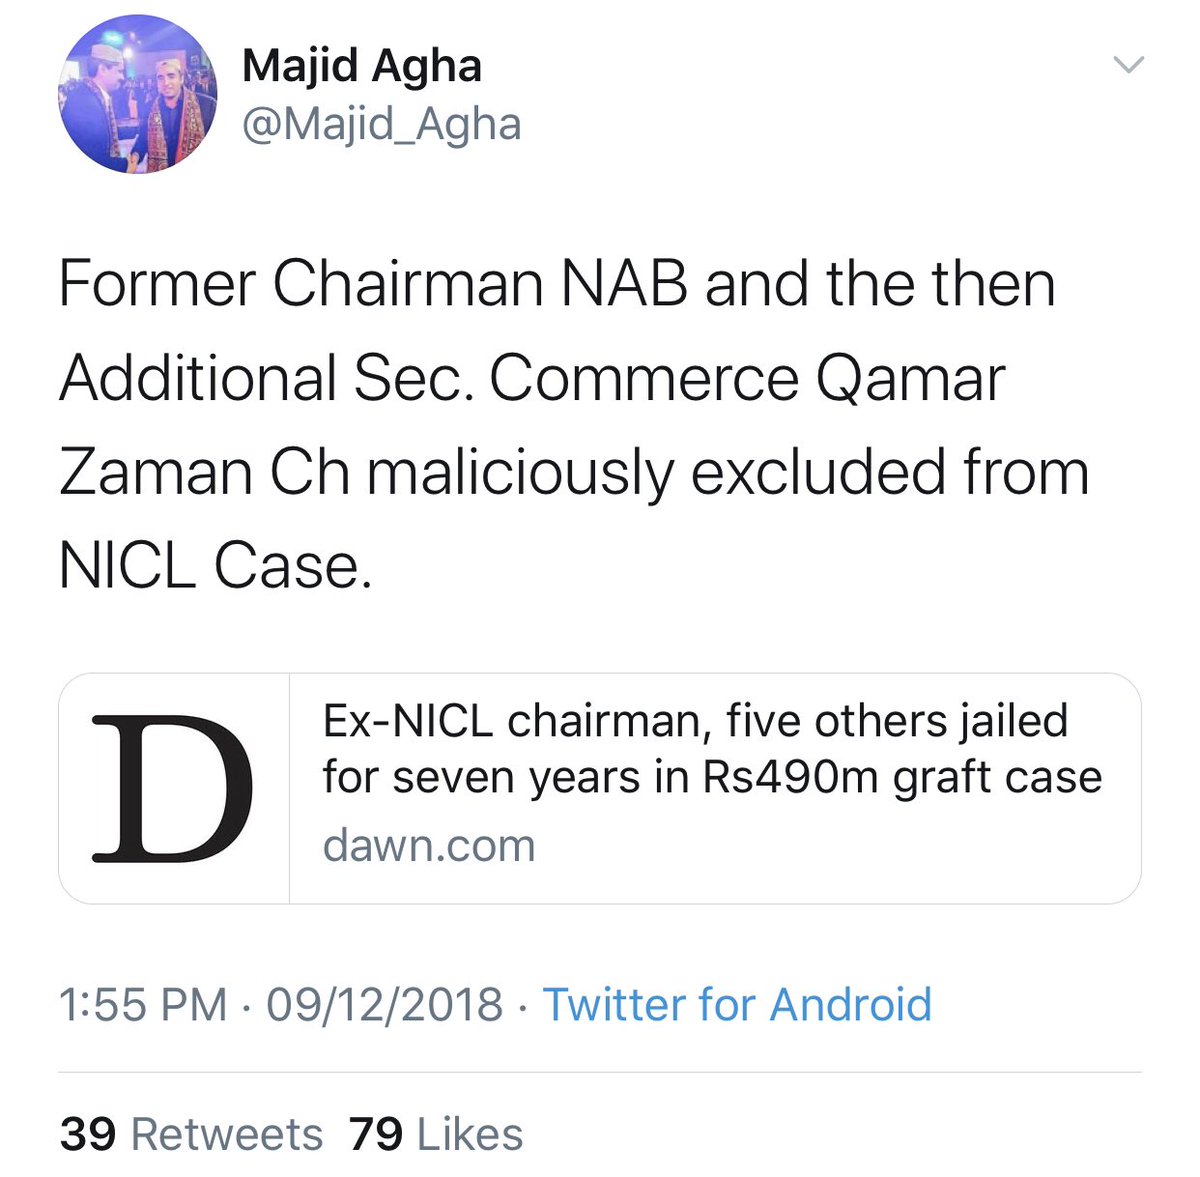 Let’s just also say it was also Coincidental The Pmln Appointed NAB Chief had “some reputation” while serving as Secretary Interior by declaring himself “unemployed” & also some as Add Secretary Commerce,Pointed out by Majid Agha of PPP.